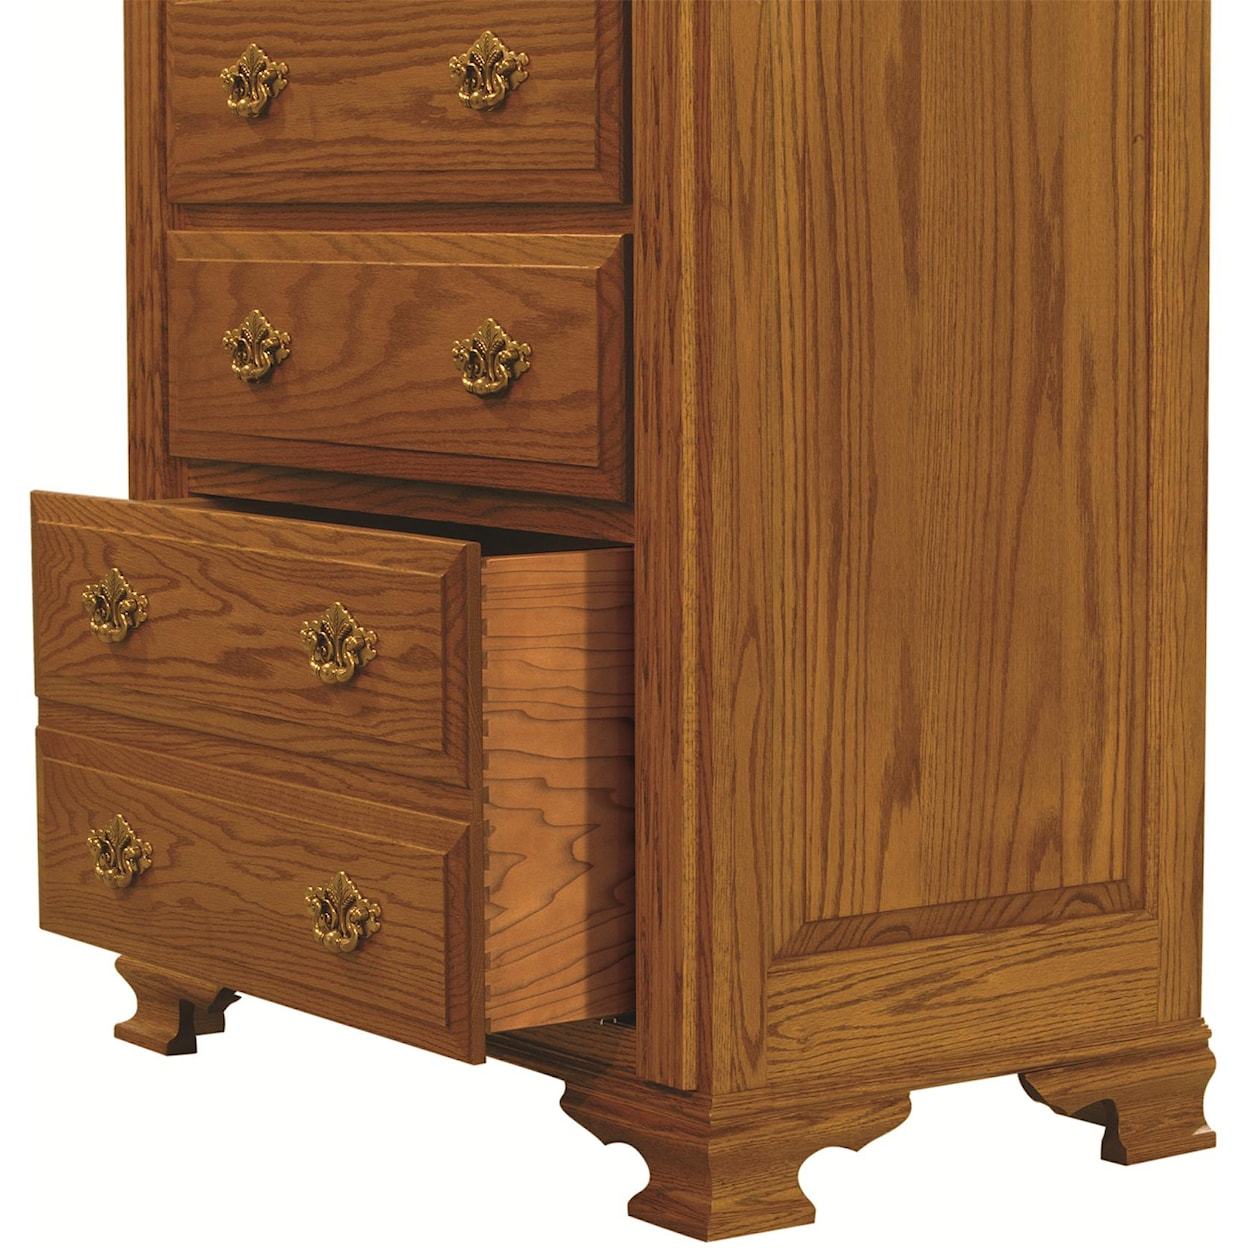 Millcraft Journeys End Chest of Drawers